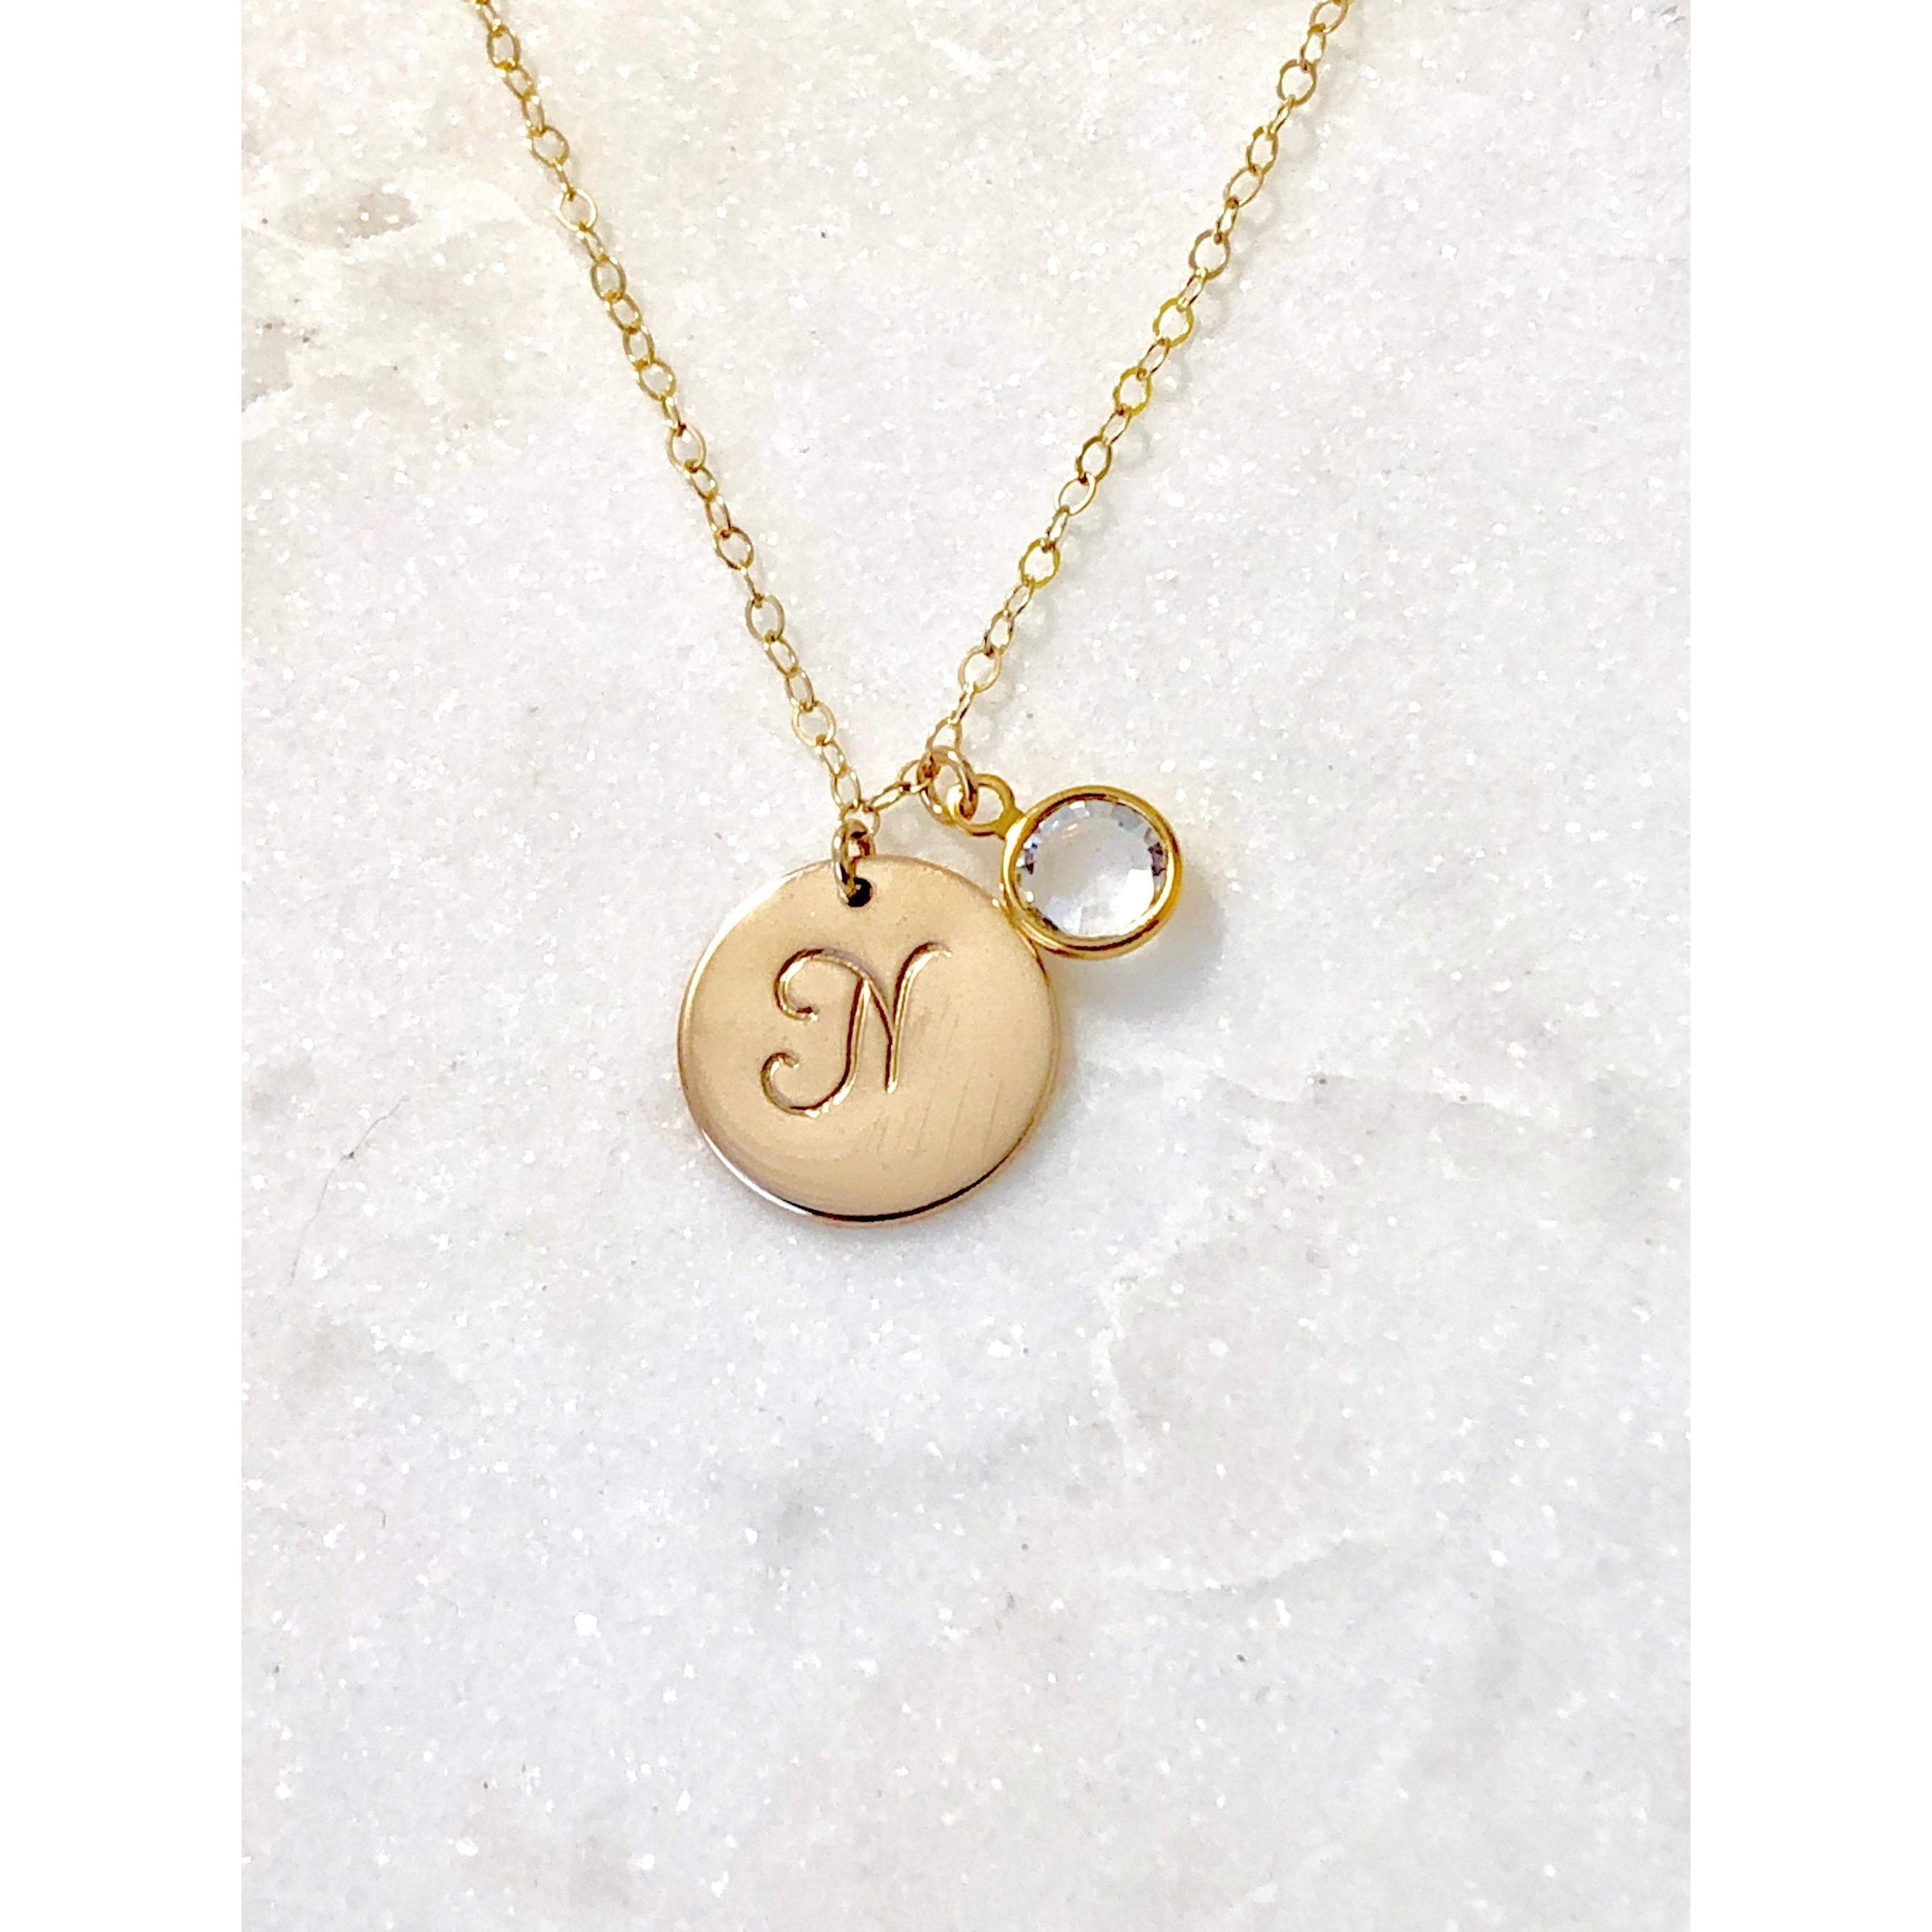 Engraved Initial Necklace - Personalised Engraved Date Necklace